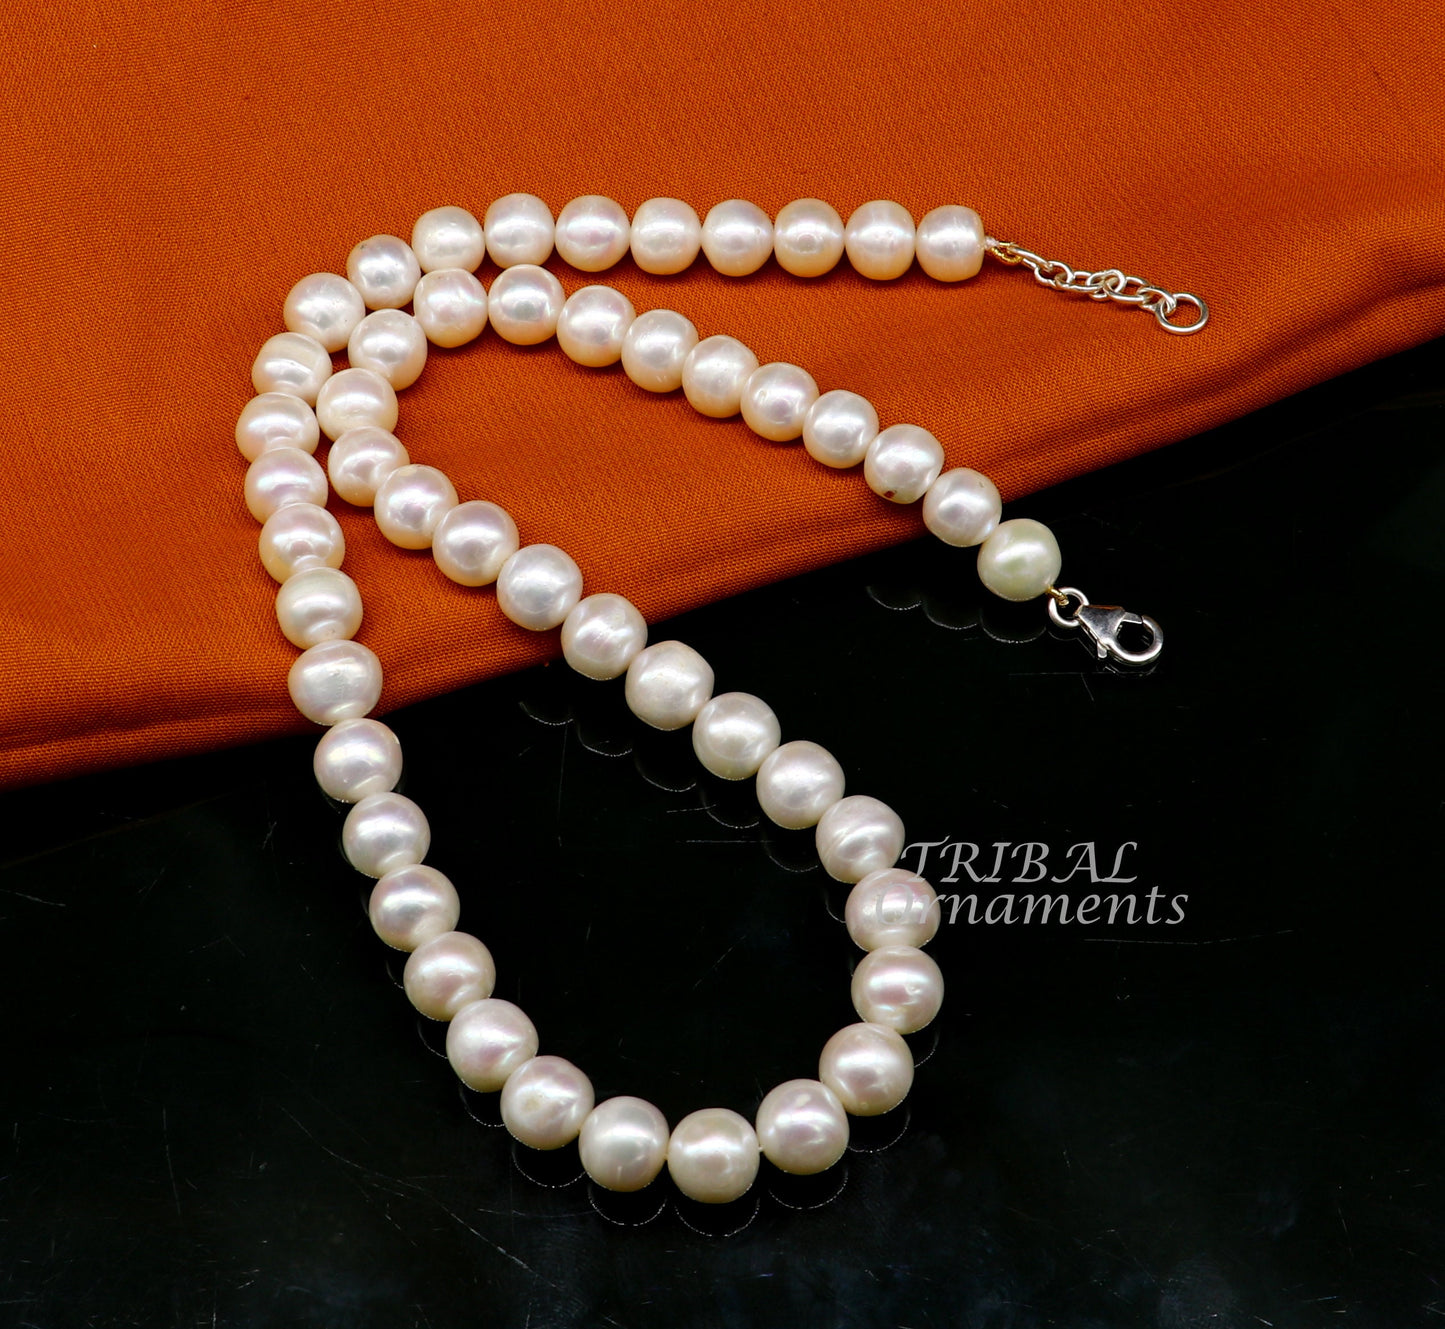 9mm fresh water pearl 248carats single line string necklace set gorgeous wedding or daily use necklace jewelry belly dance pnec06 - TRIBAL ORNAMENTS